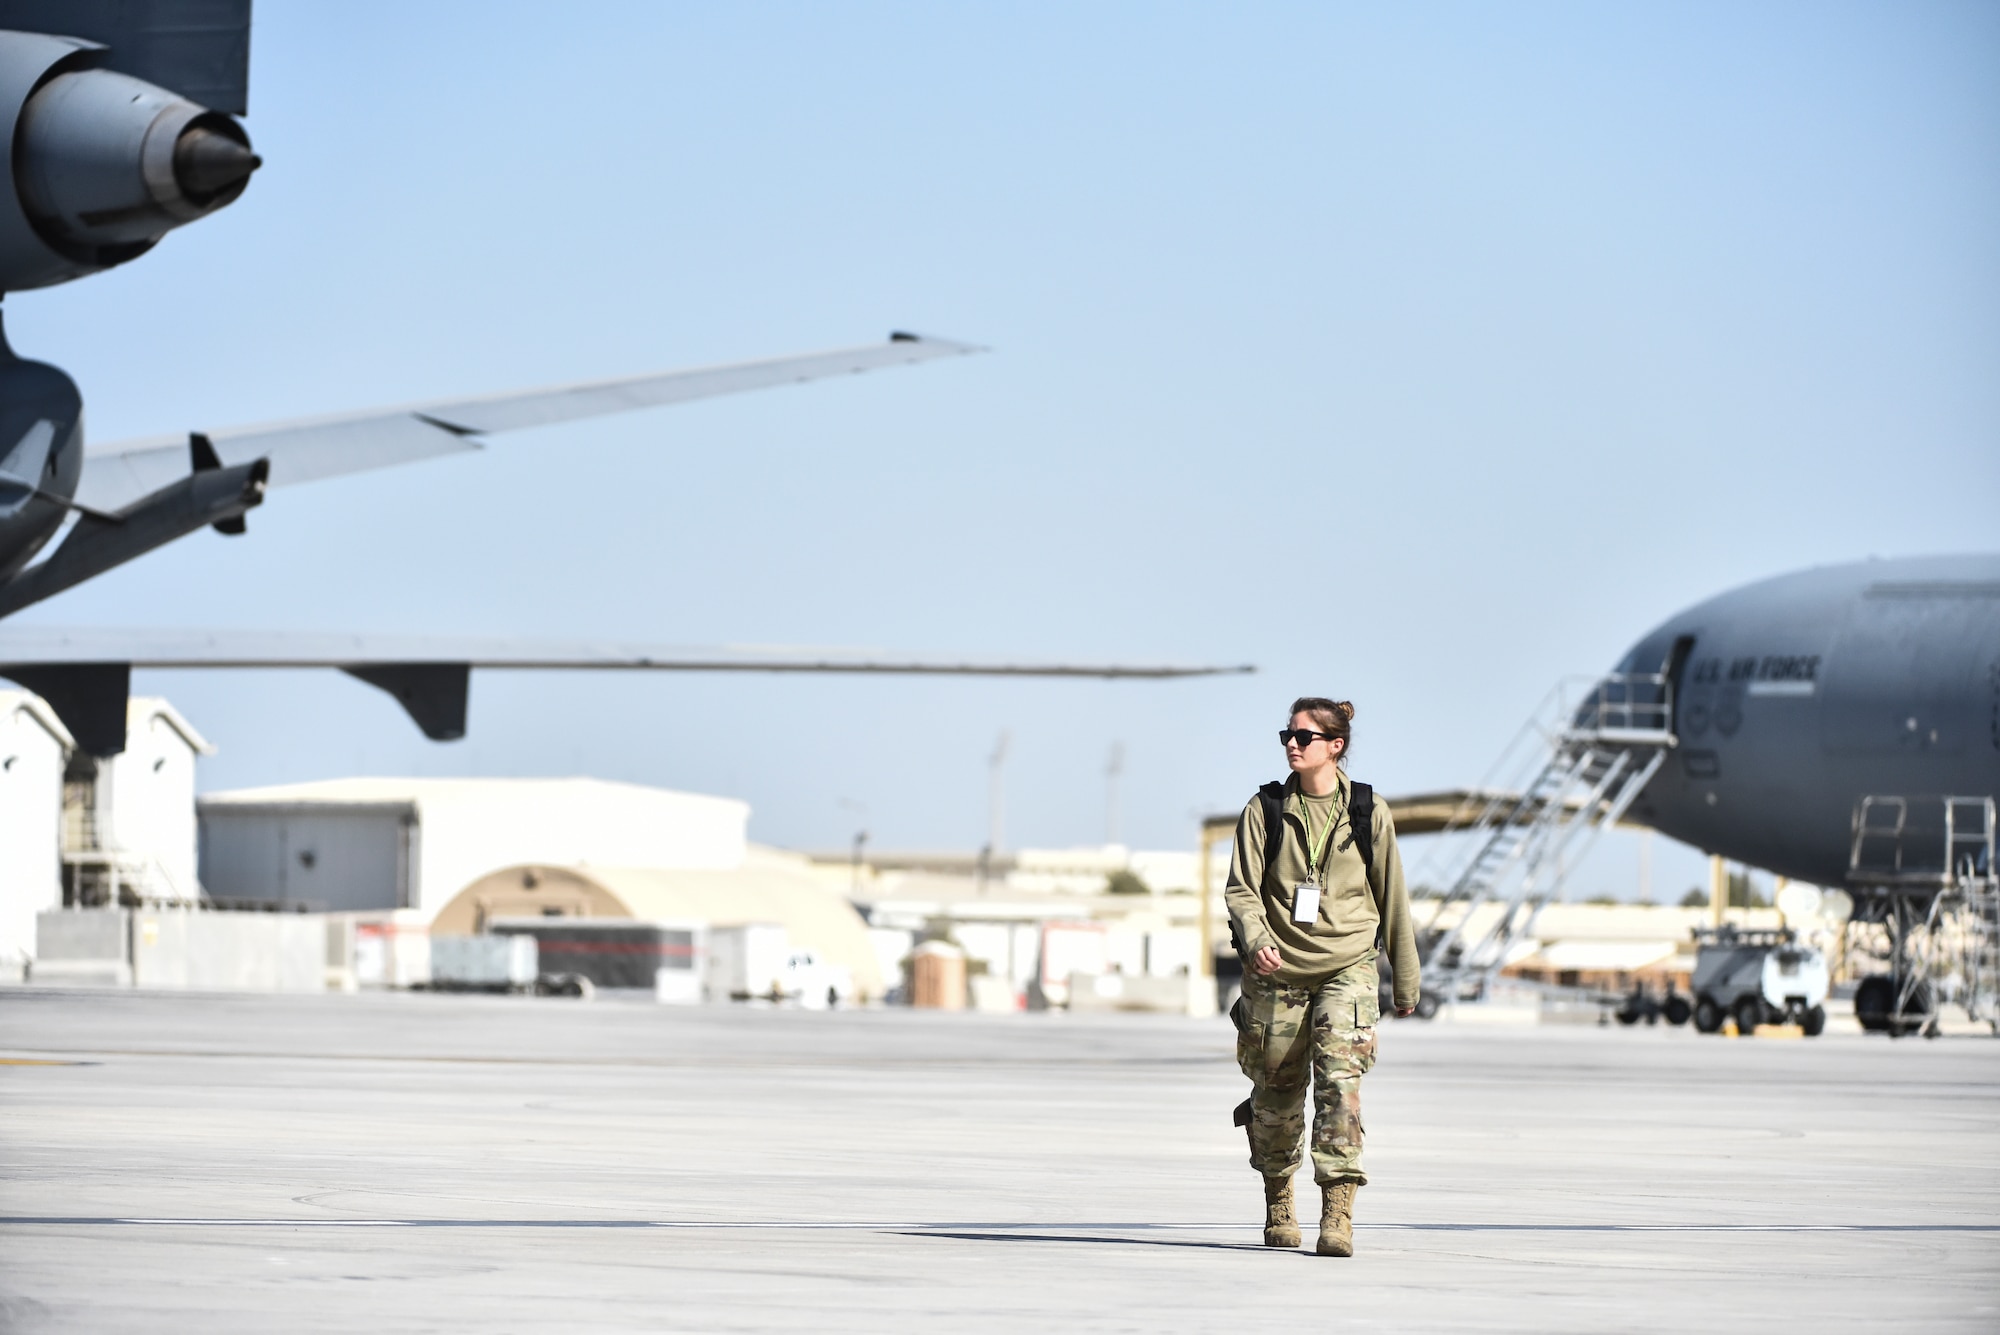 Airman 1st Class Darby Koger, 380th Expeditionary Aircraft Maintenance Squadron electronical and environmental specialist, walks past KC-10 Extenders along the flight line at Al Dhafra Air Base, United Arab Emirates, Mar. 5, 2019. E&E specialists work on the electrical systems that support the environment for personnel and passengers inside the aircraft. (U.S. Air Force photo by Senior Airman Mya M. Crosby)